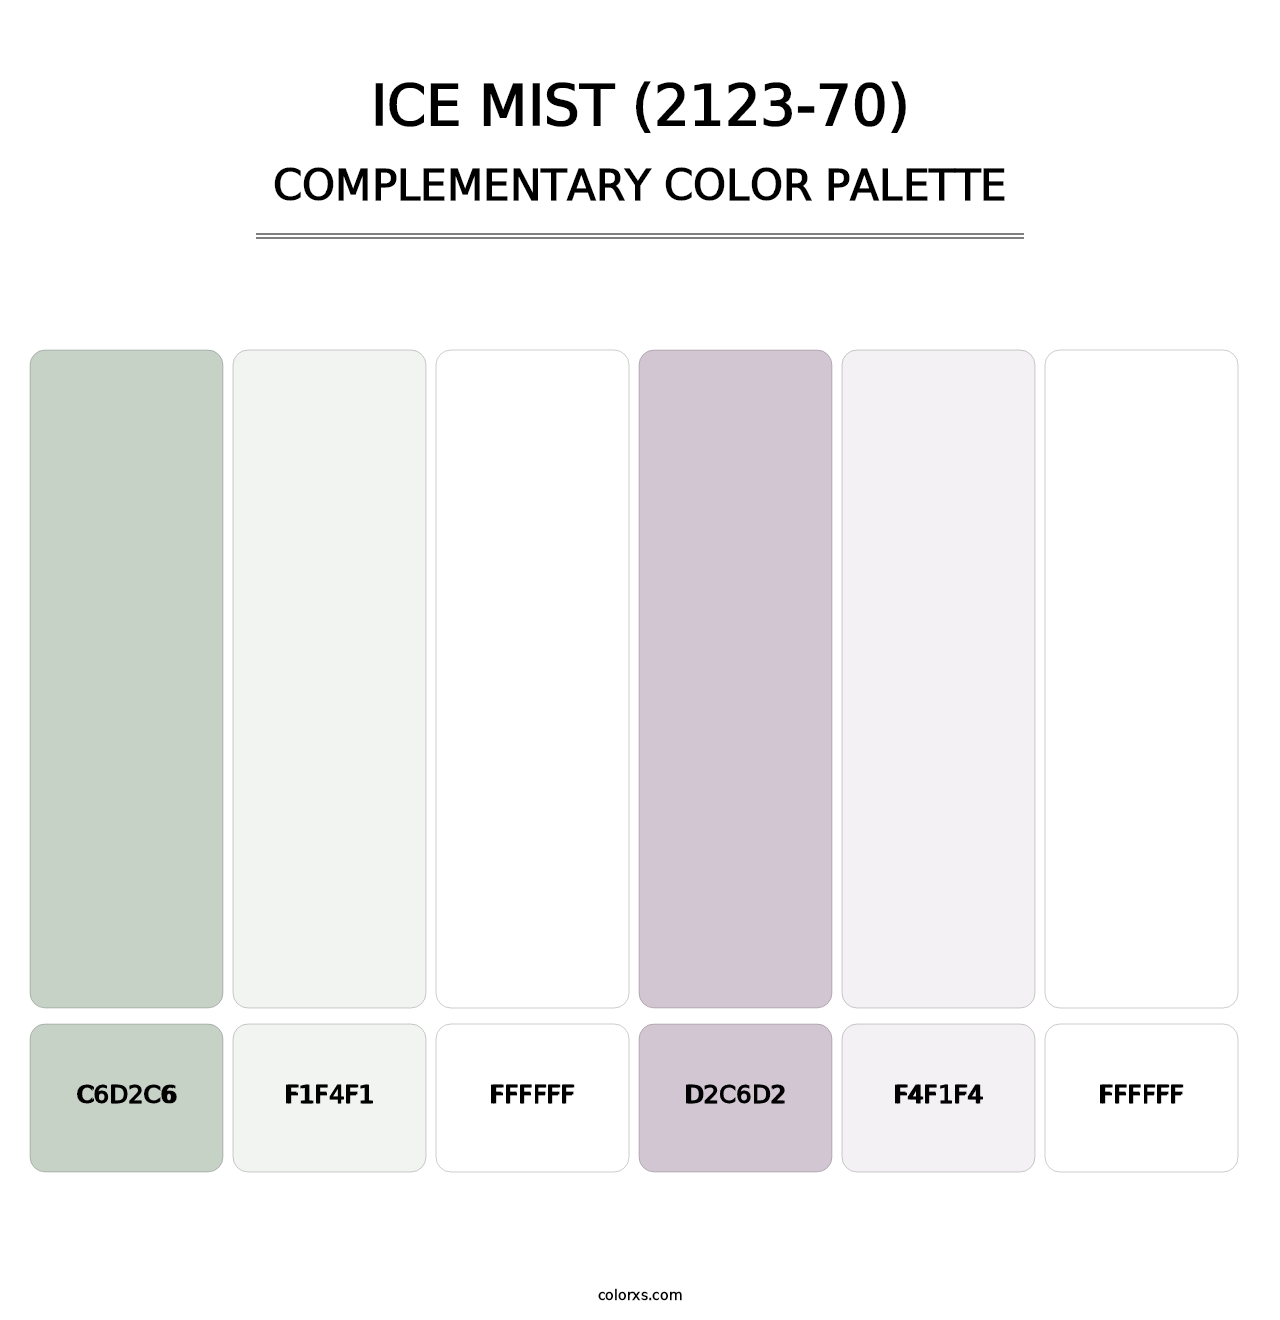 Ice Mist (2123-70) - Complementary Color Palette